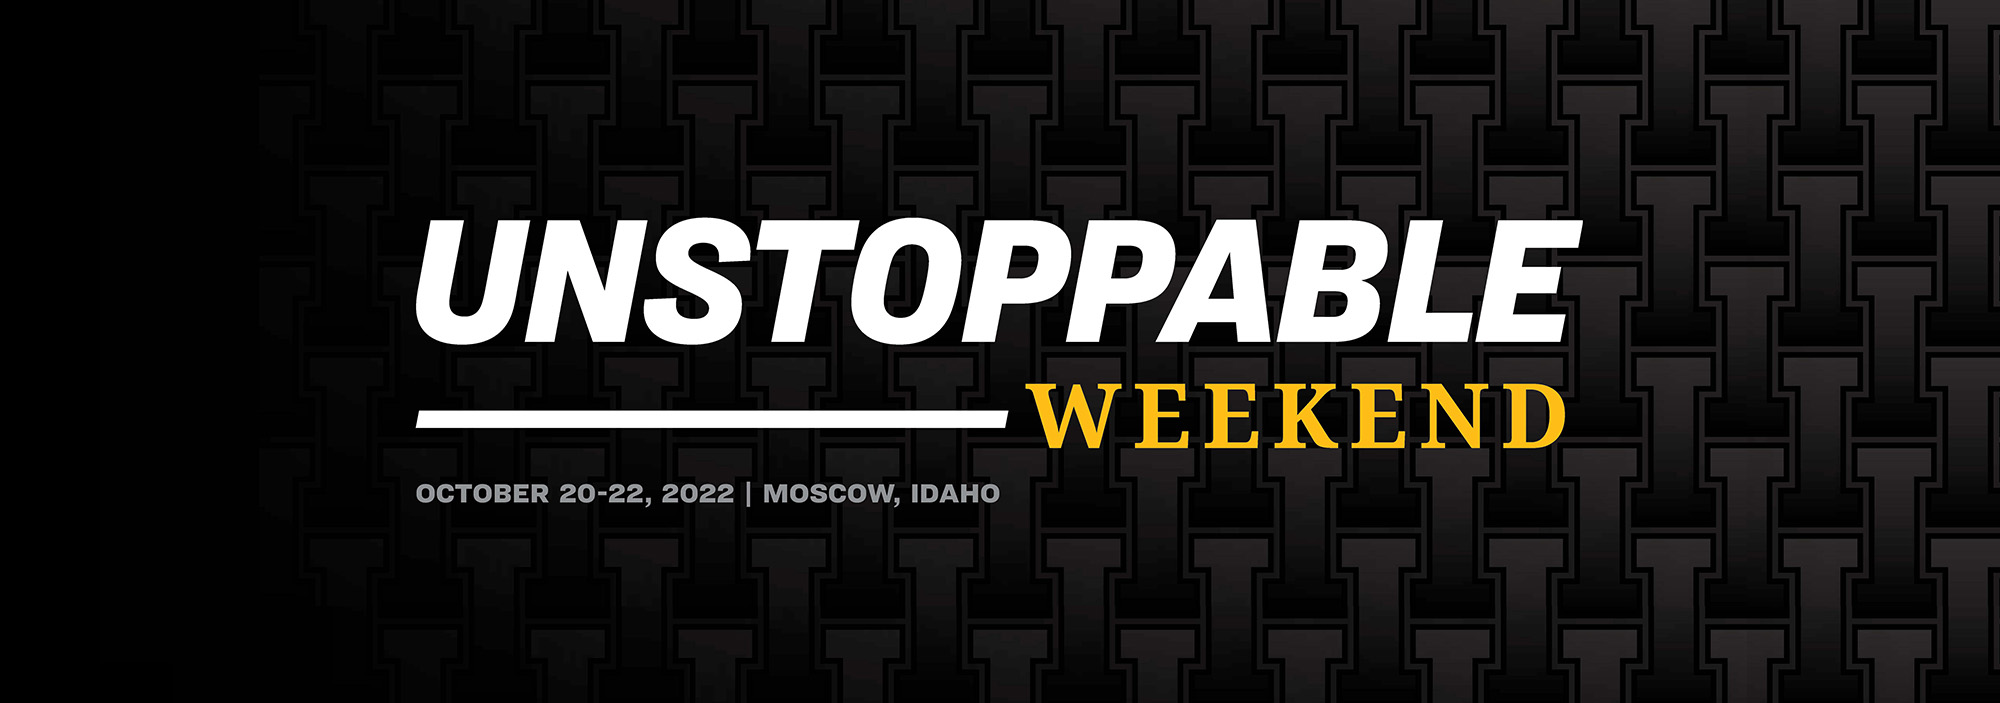 Unstoppable Weekend | October 20-22, 2022 | Moscow, Idaho